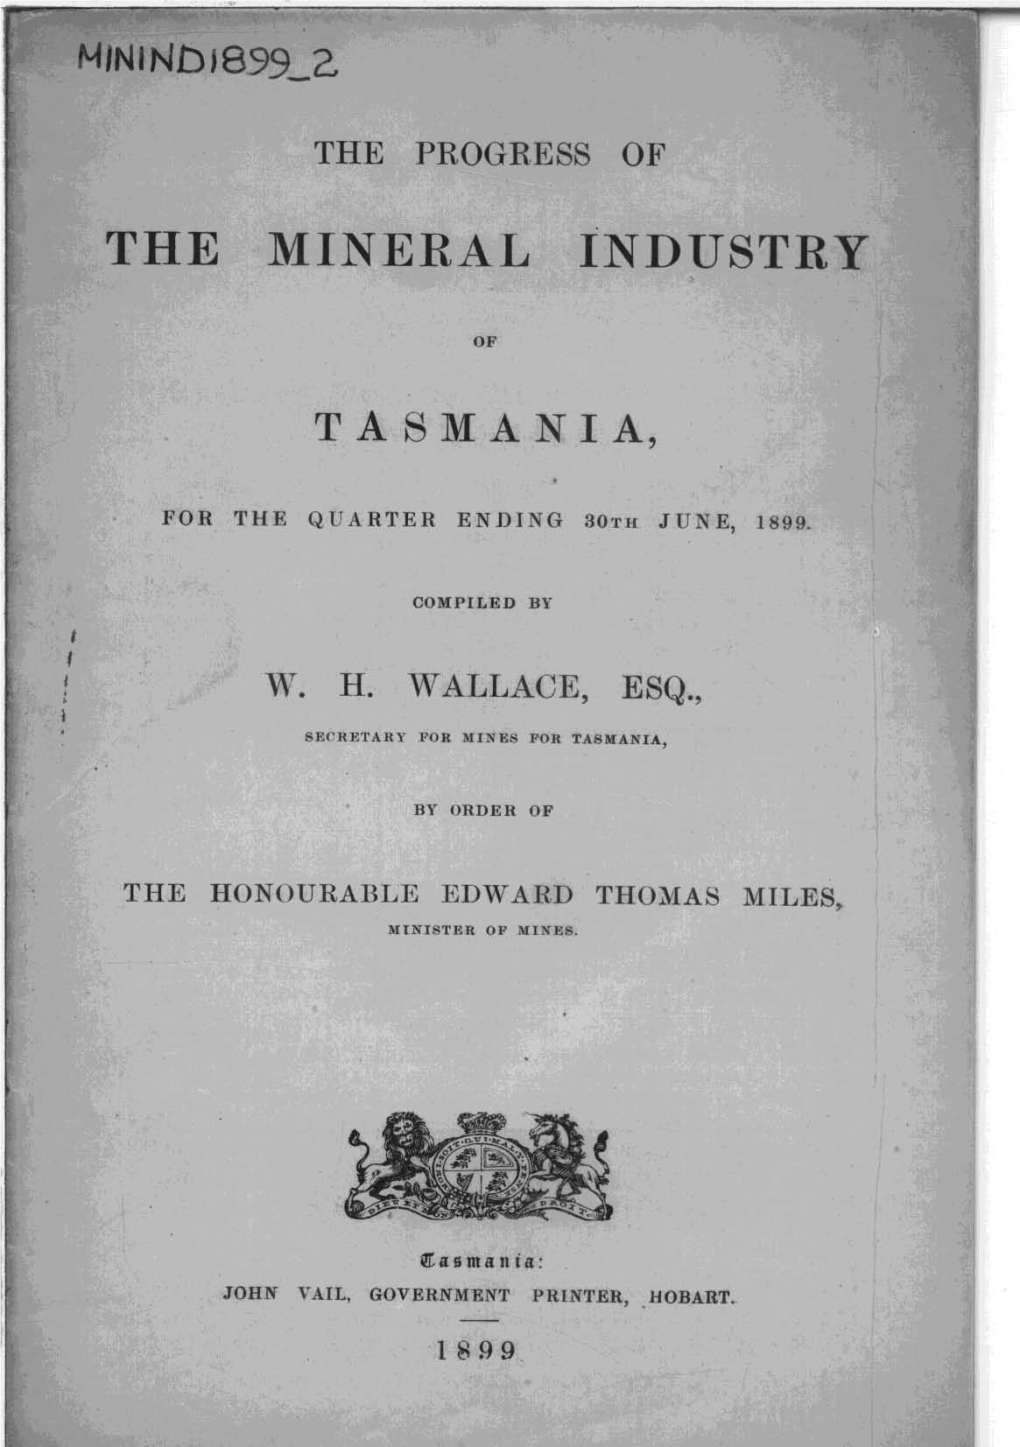 The Mineral Industry